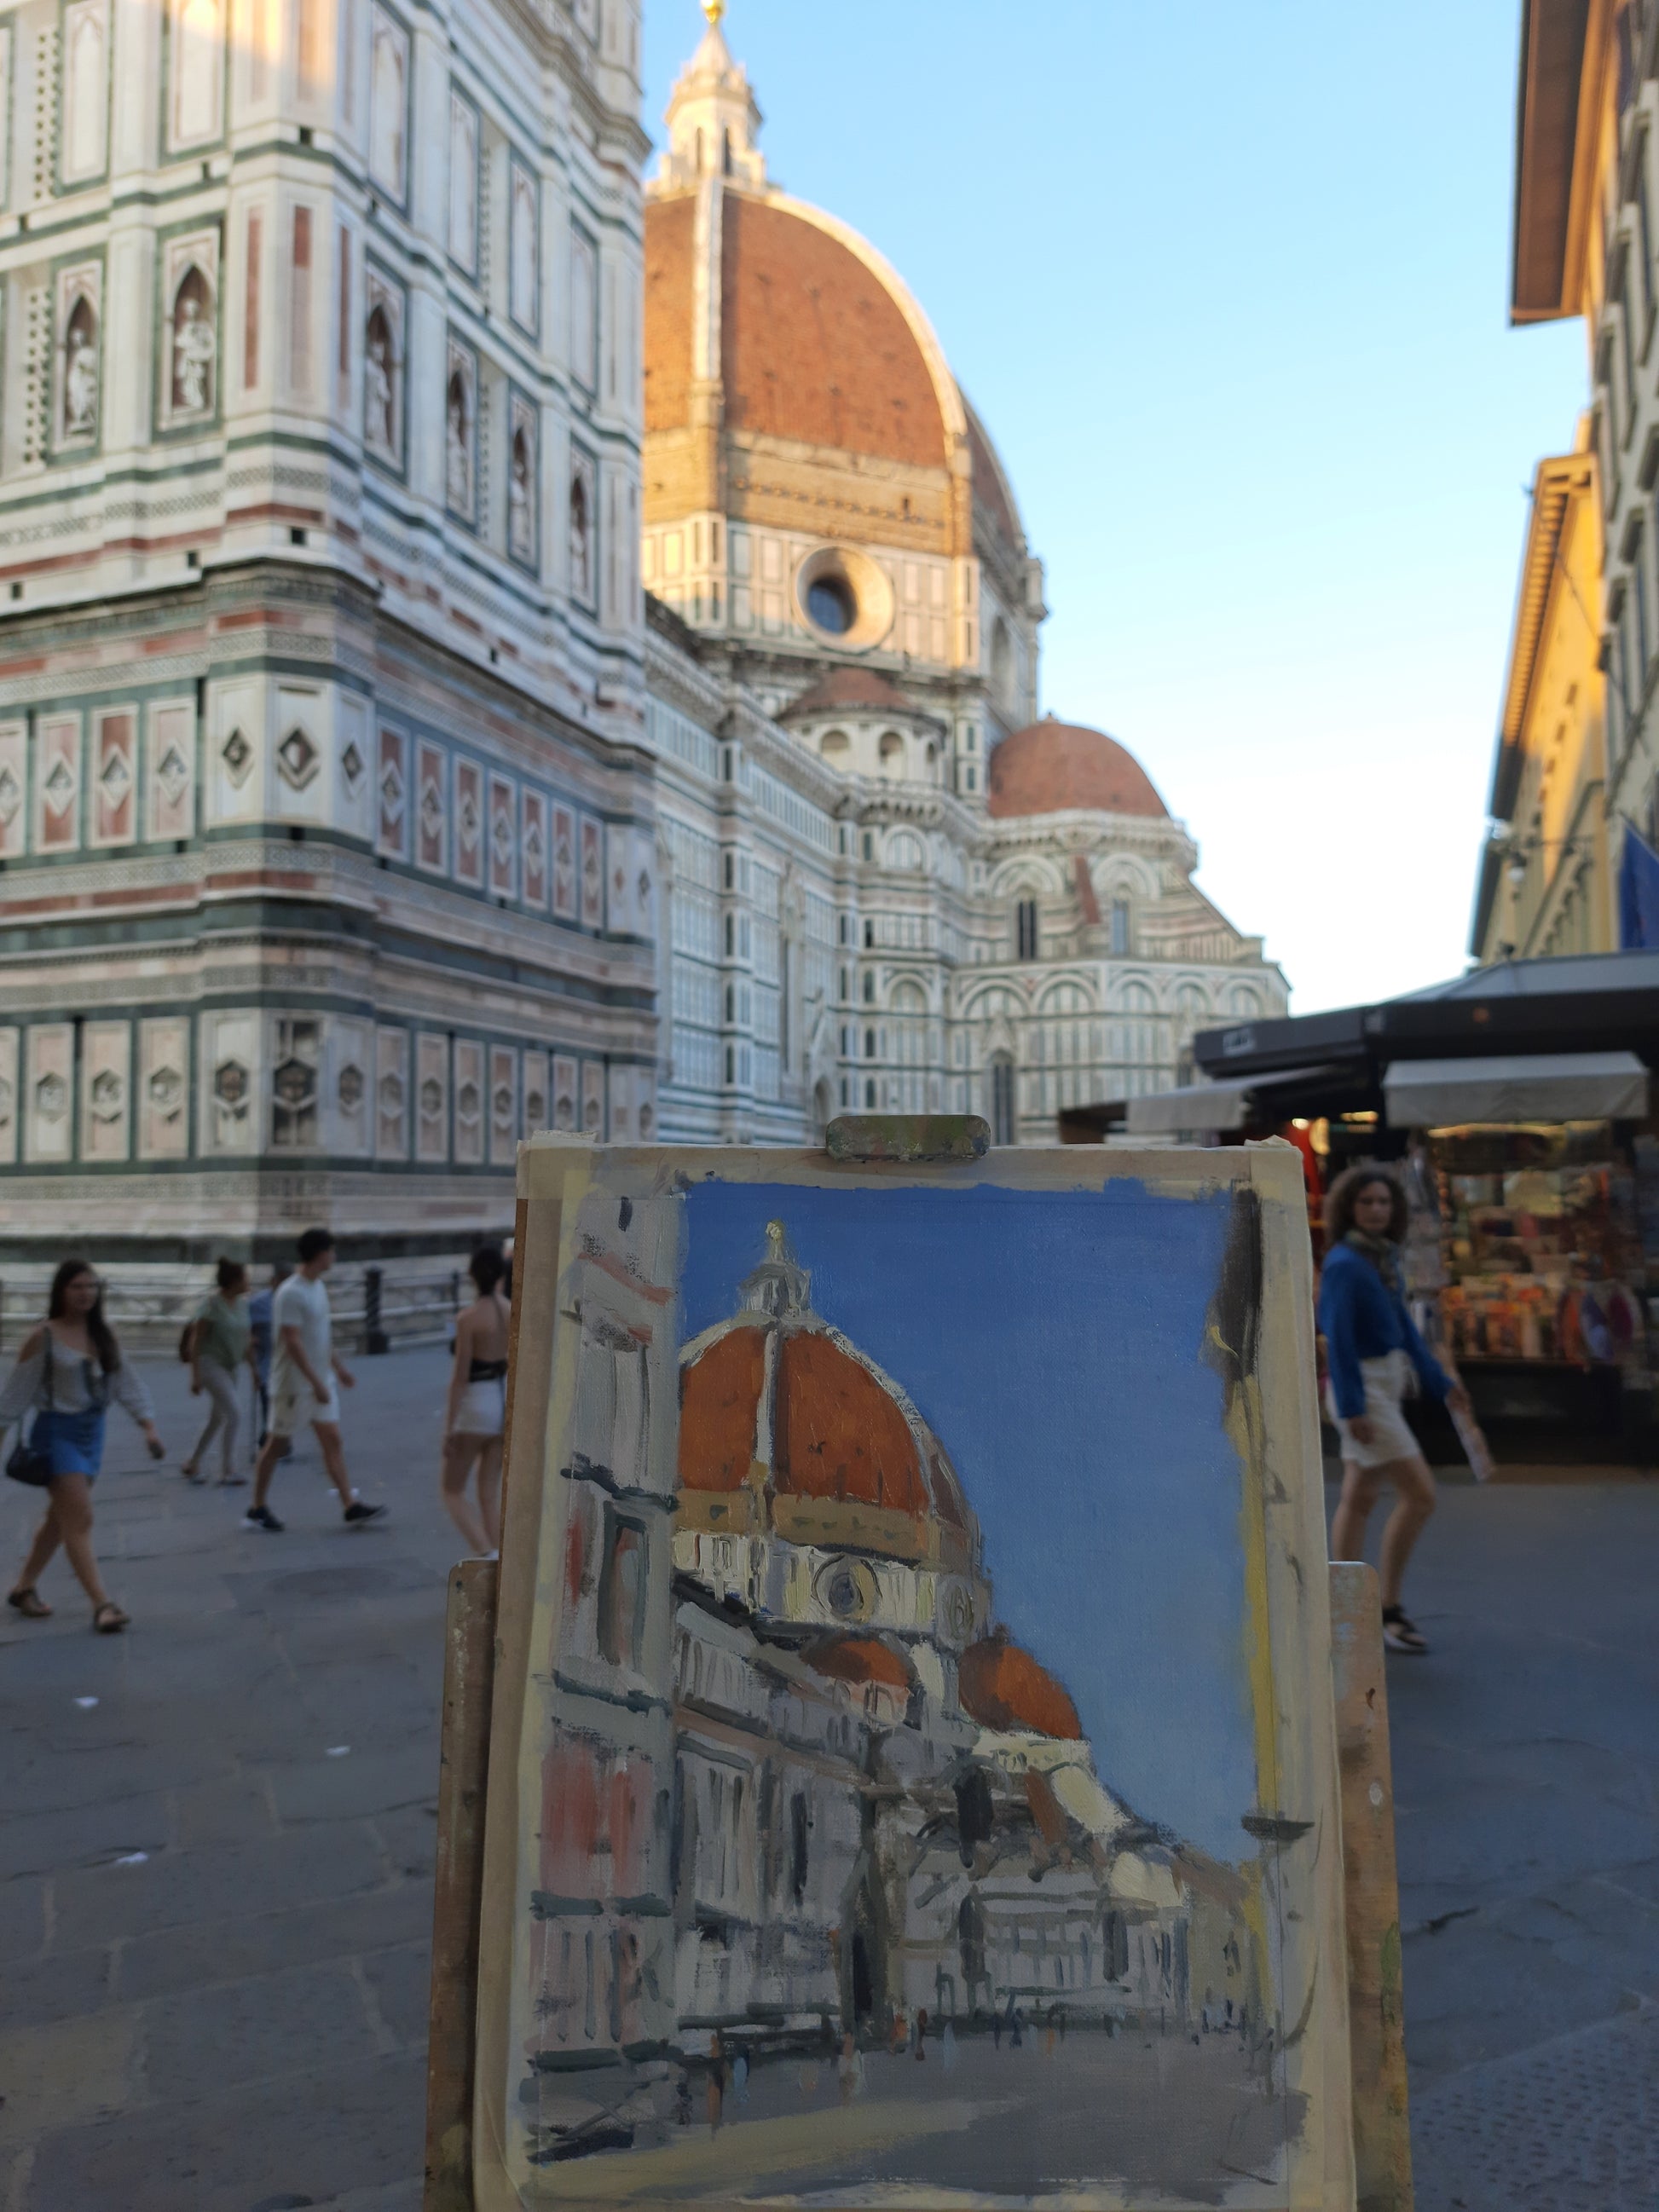 Image of the painting being worked on plein air in front of the cathedral in Florence